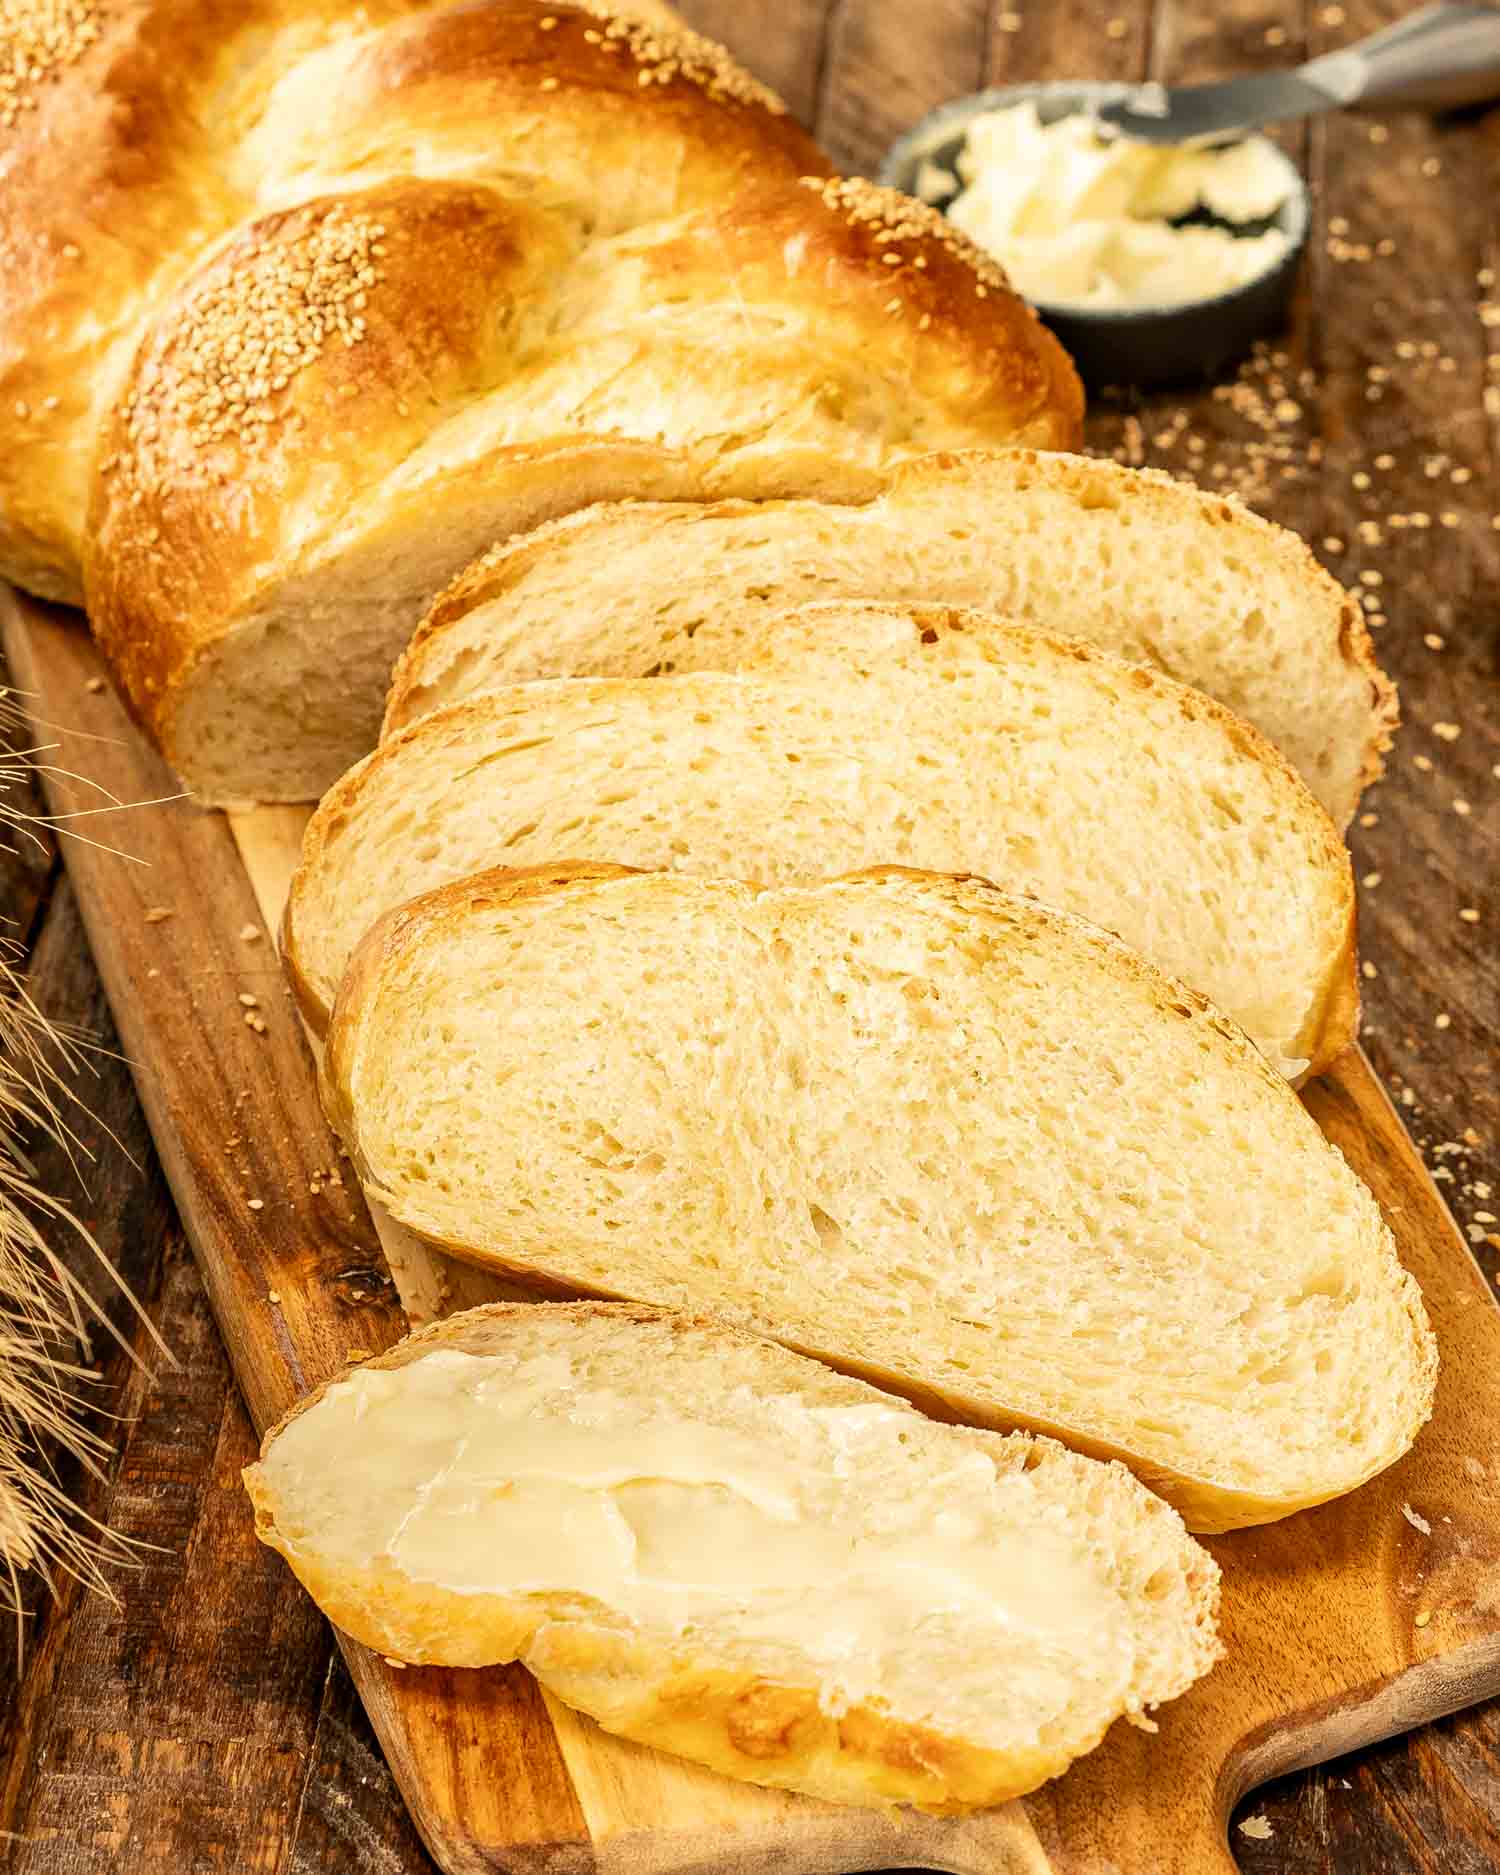 A fresh, golden-braided no knead challah bread on a wooden board with slices and butter nearby.